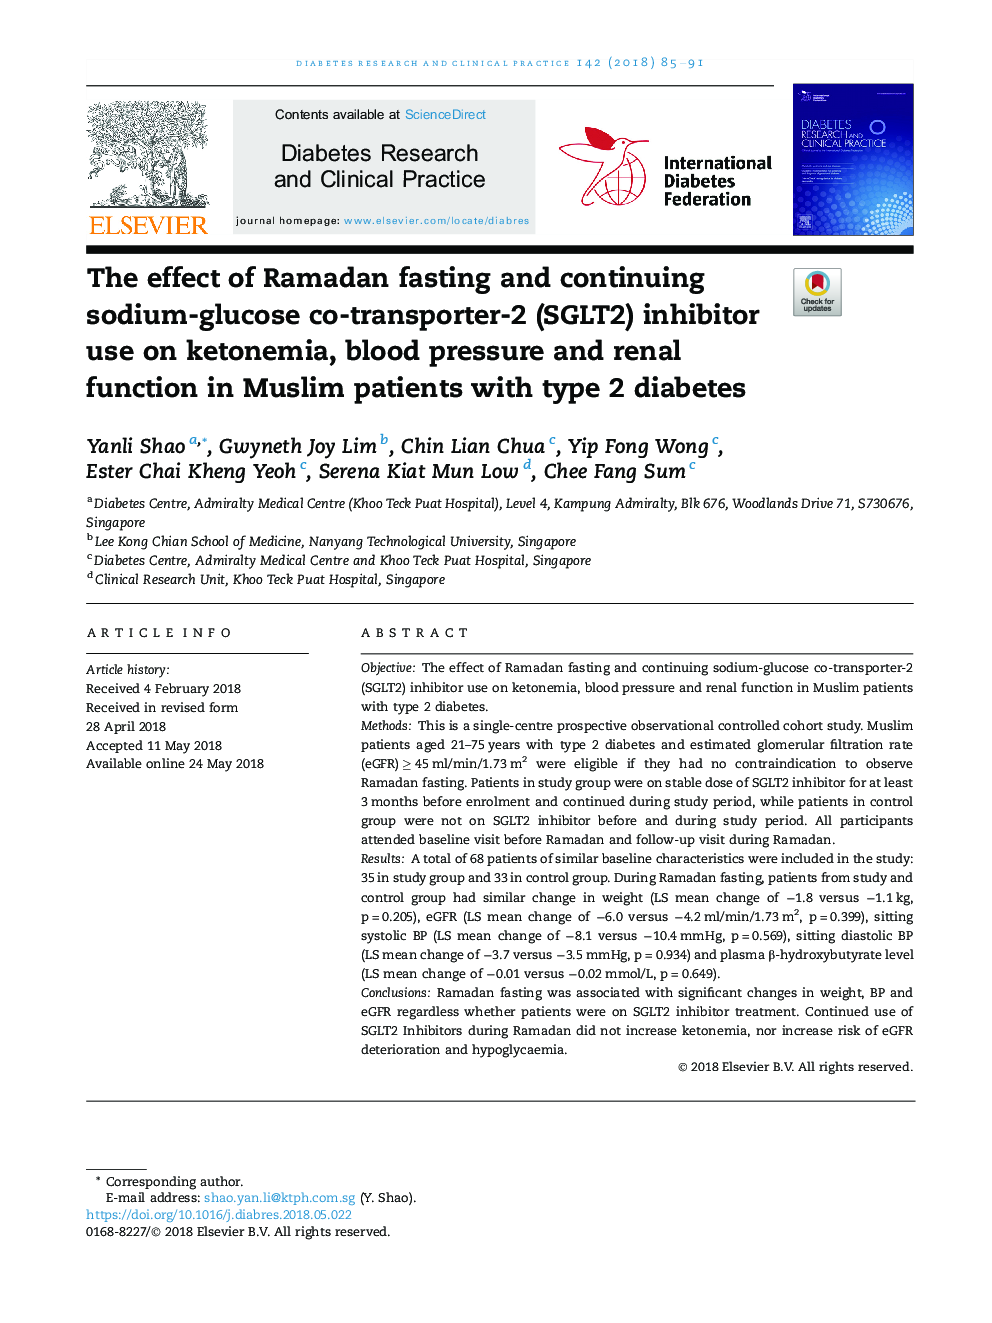 The effect of Ramadan fasting and continuing sodium-glucose co-transporter-2 (SGLT2) inhibitor use on ketonemia, blood pressure and renal function in Muslim patients with type 2 diabetes